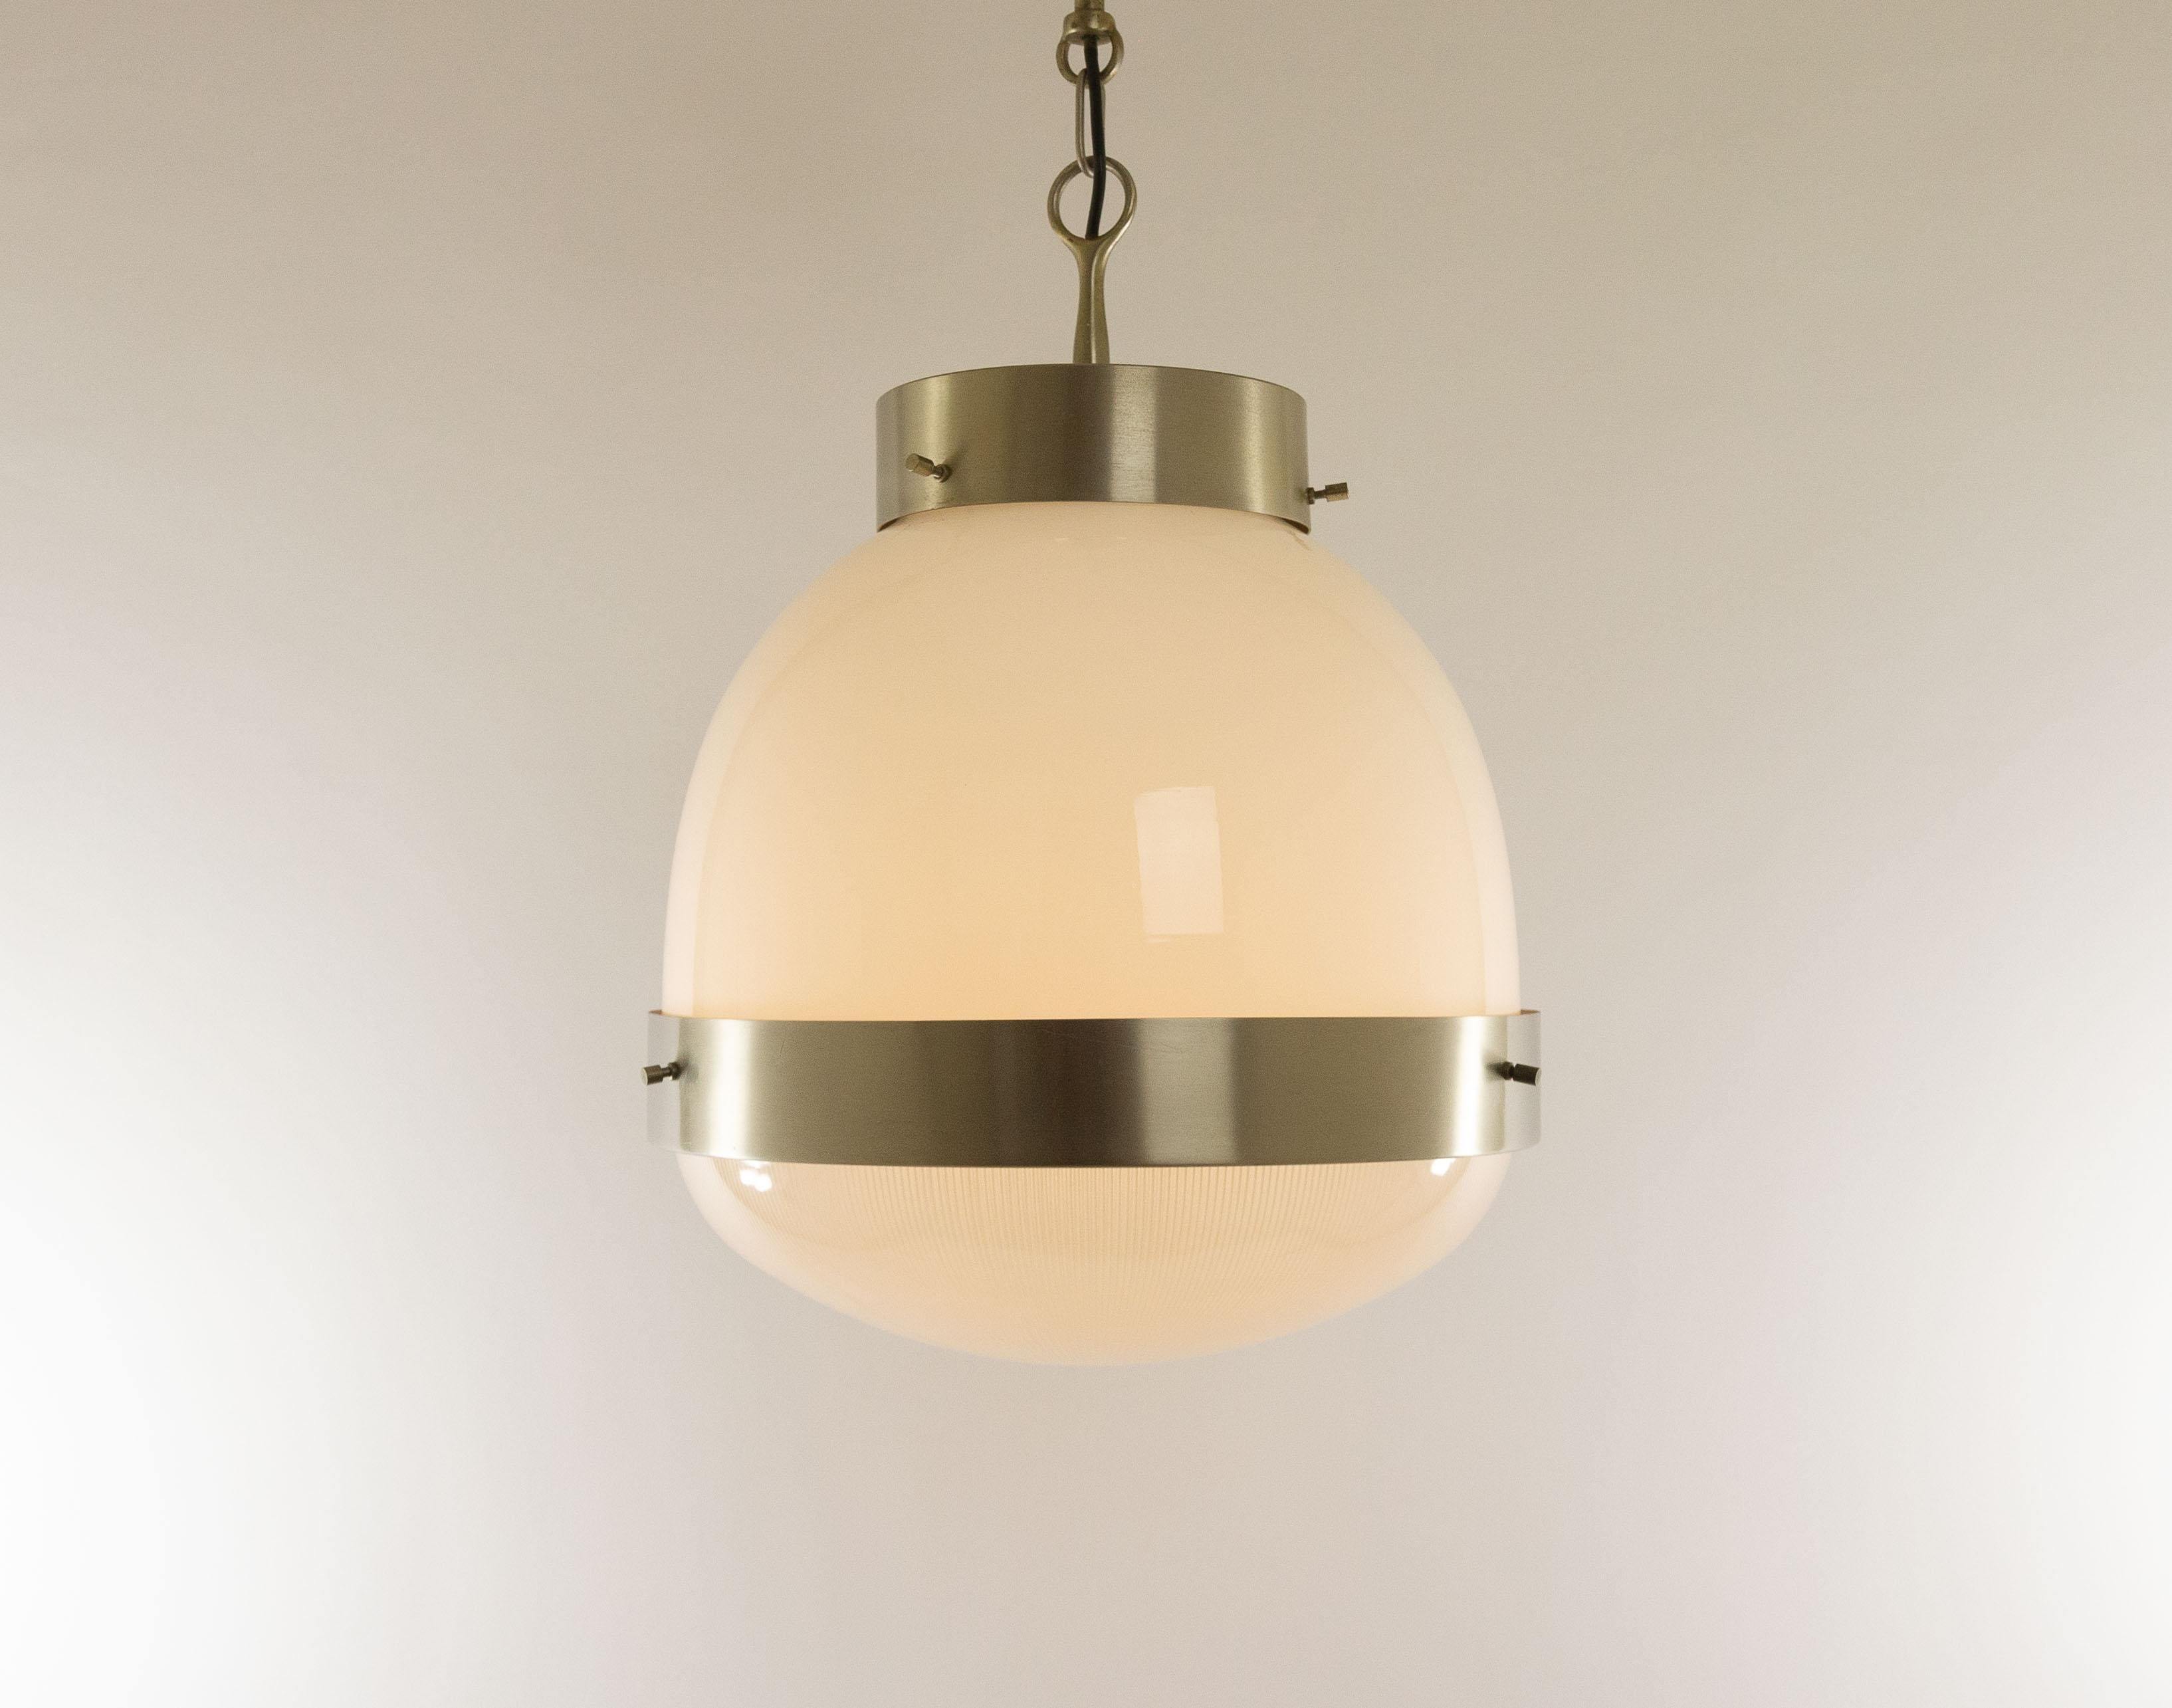 Mid-20th Century Pair of Delta Pendants by Sergio Mazza for Artemide, 1960s For Sale